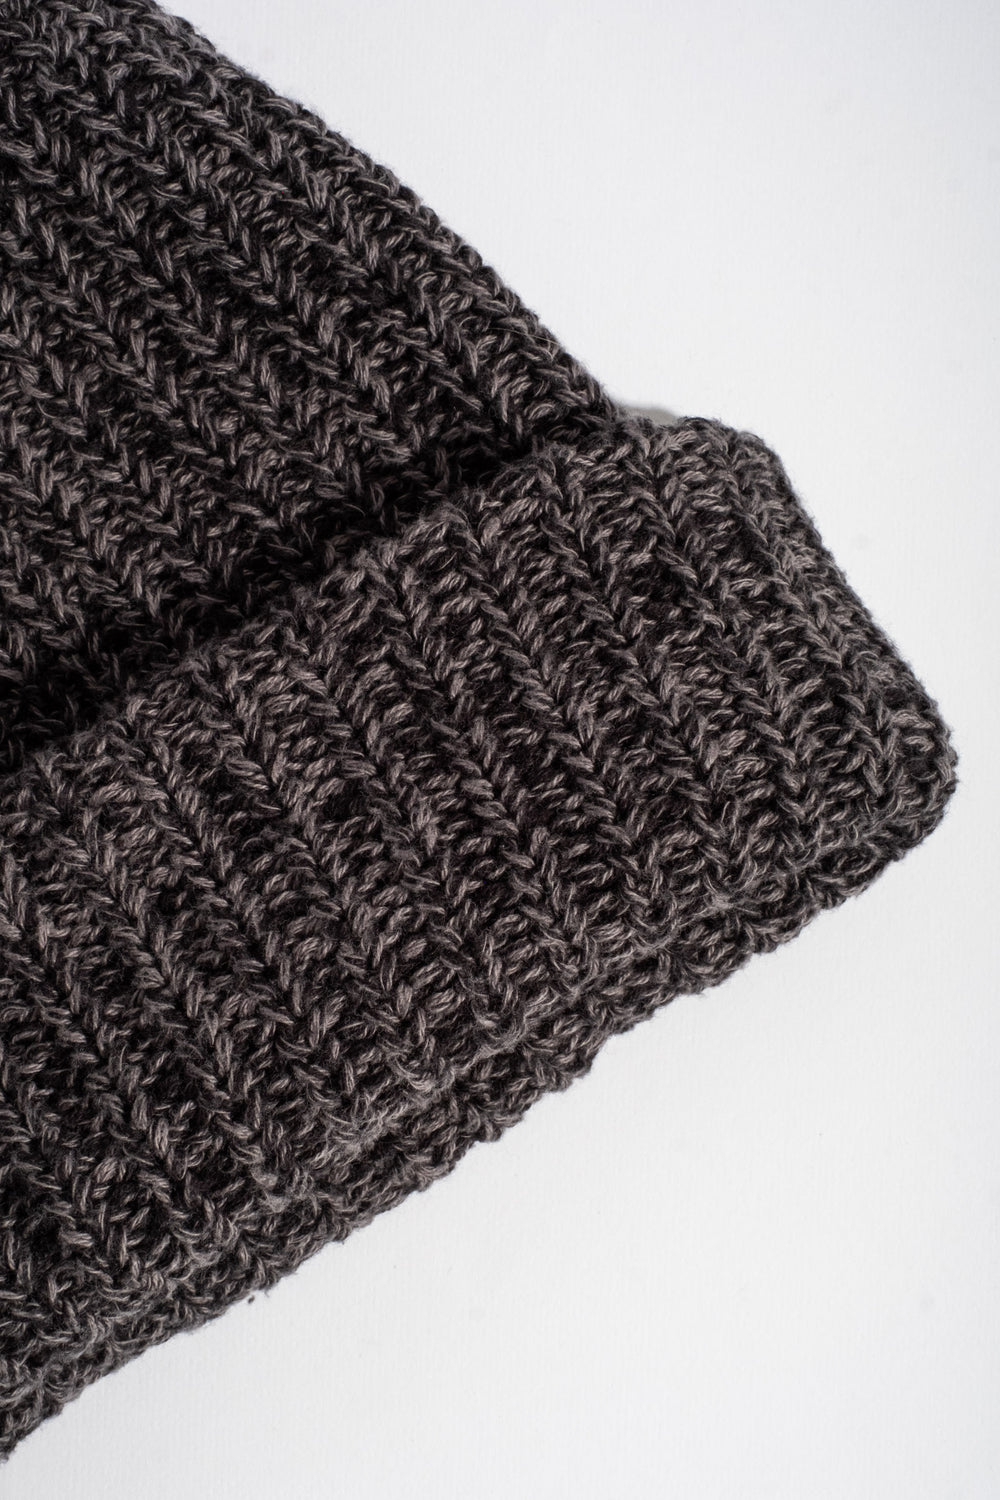 Knit Hat in Black + Charcoal